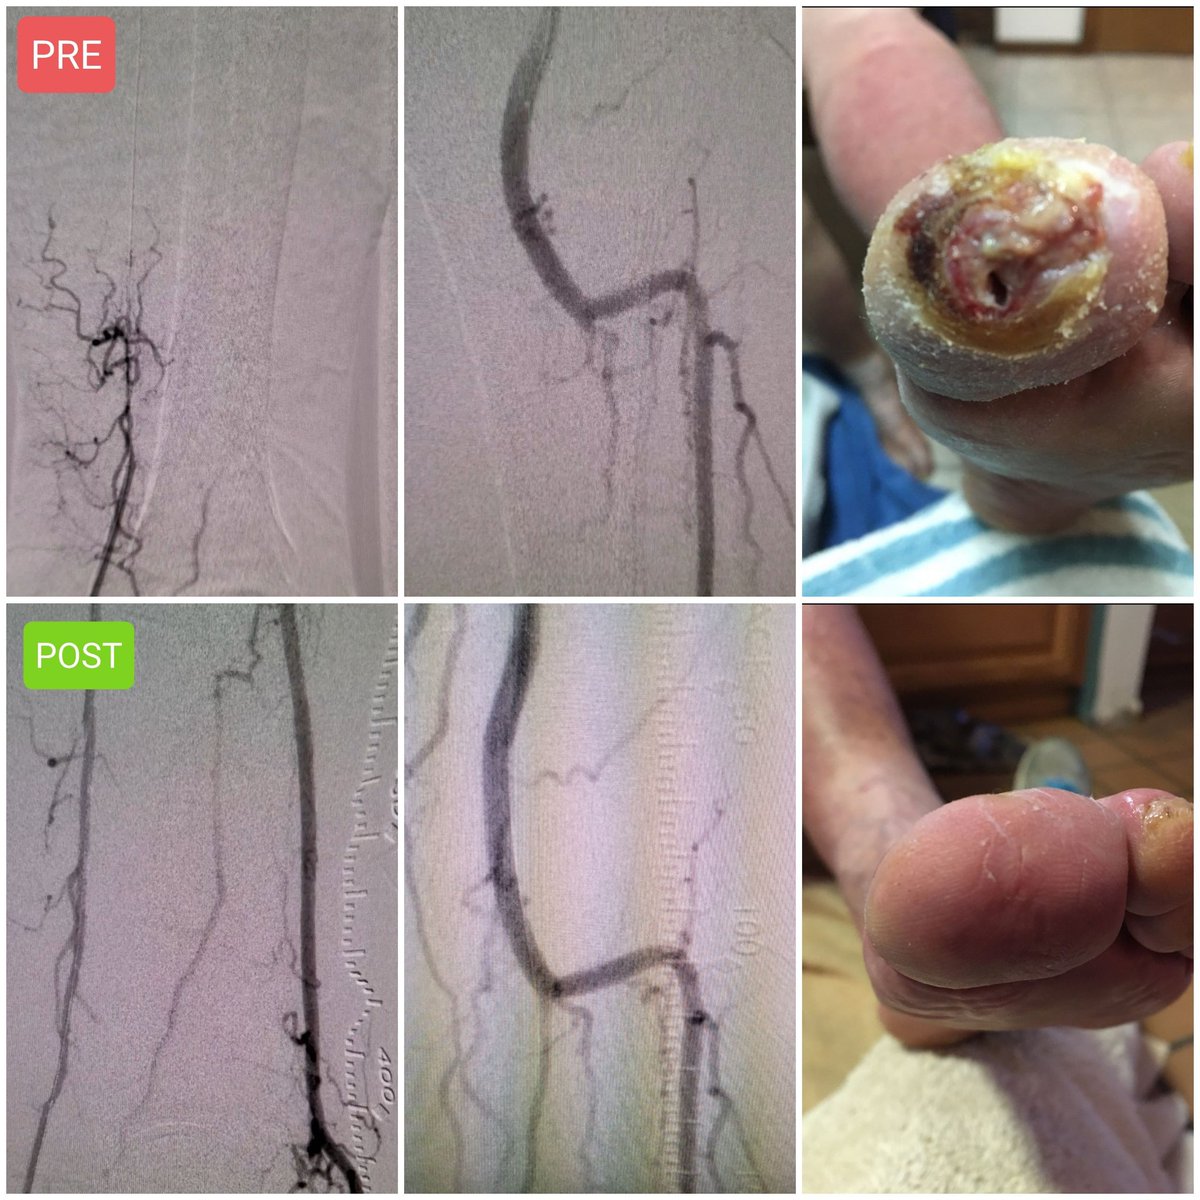 Patient told amputation is necessary. This #irad thinks not!!! #PADawareness #limbsalvage #CLIfighters